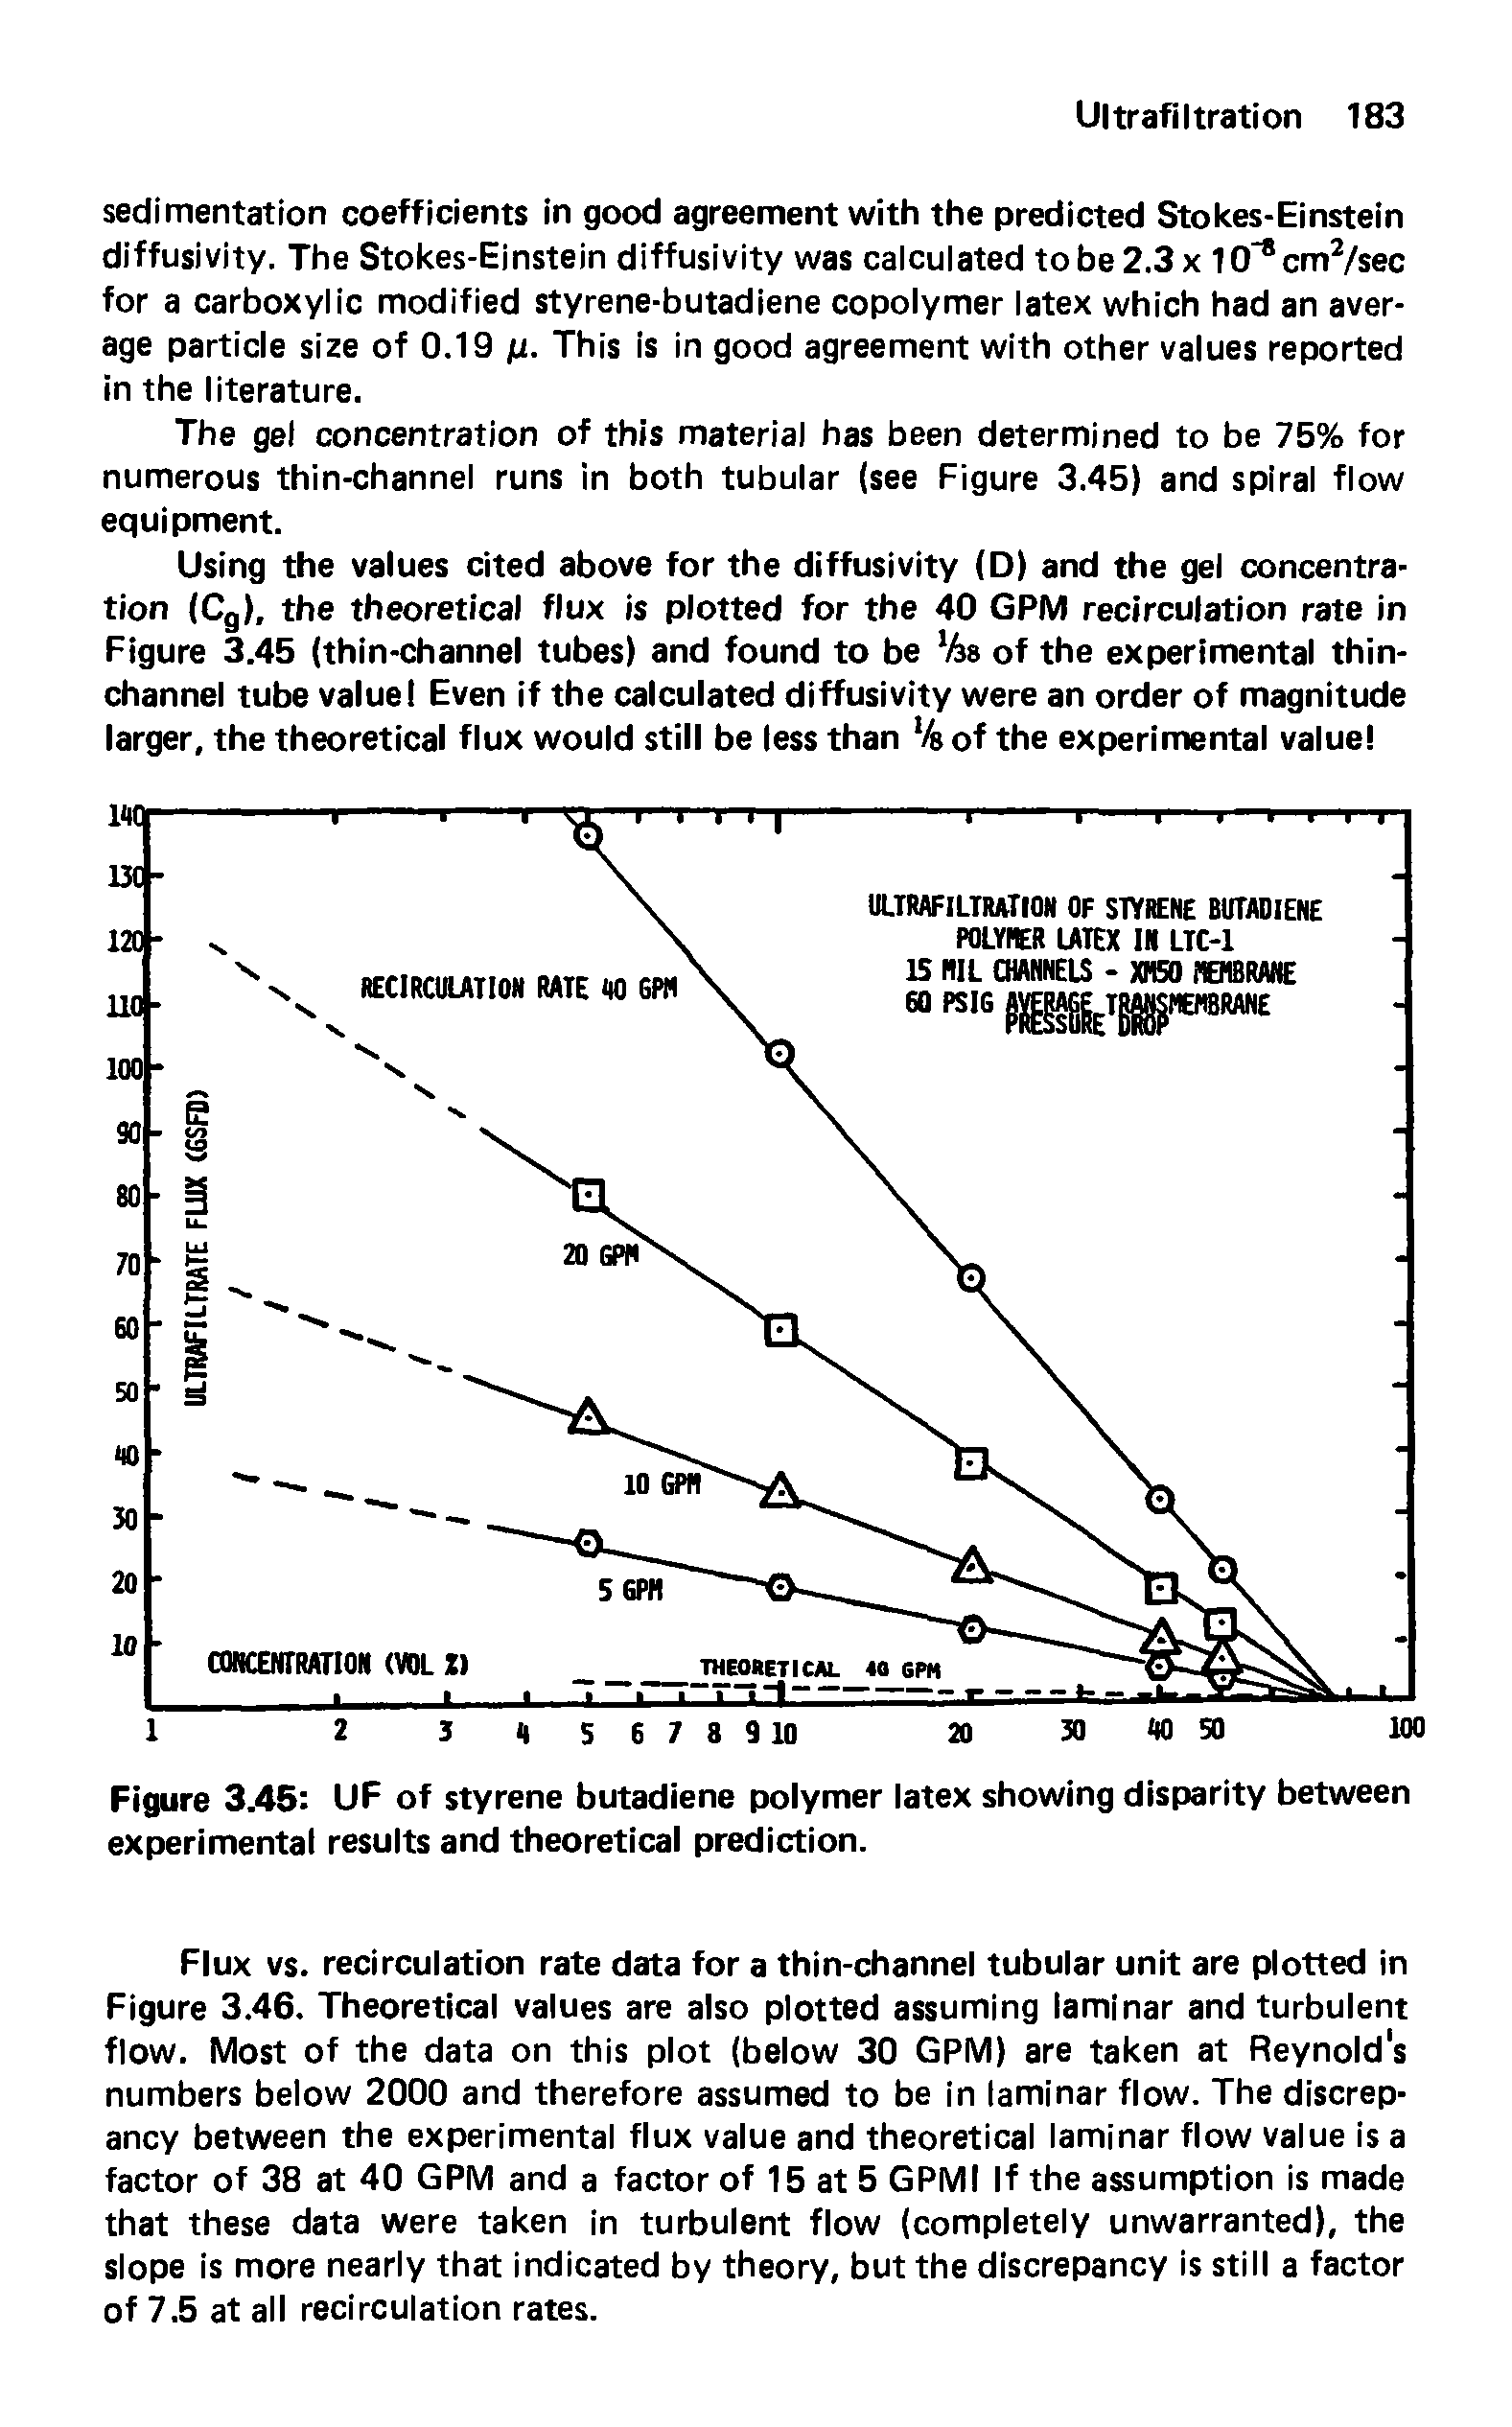 Figure 3.45 UF of styrene butadiene polymer latex showing disparity between experimental results and theoretical prediction.